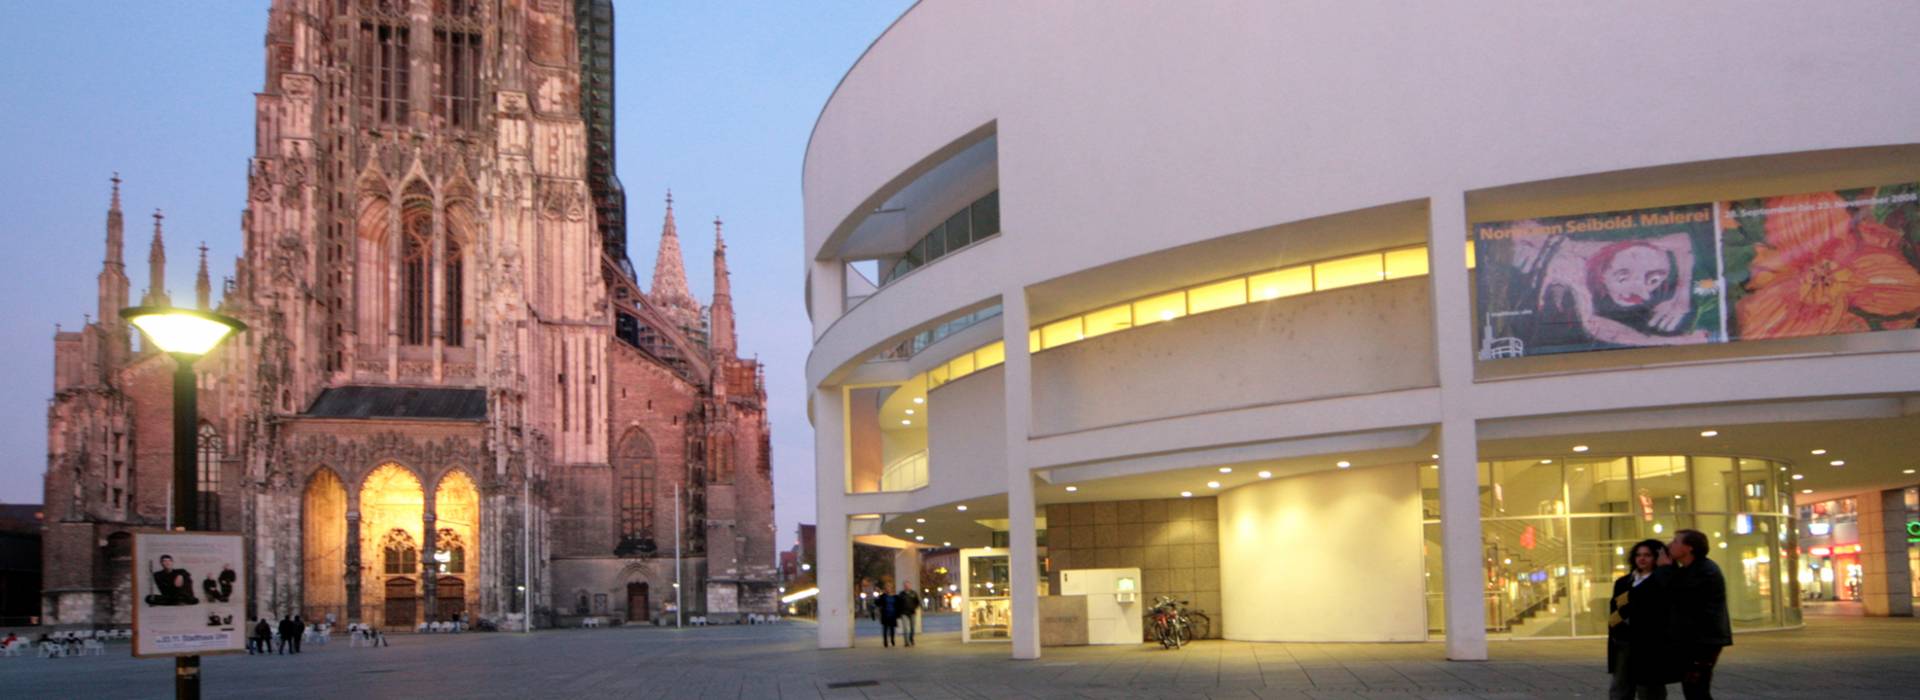 The Ulm Minster and the Stadthaus during the evening twilight. Photo: Ulm / Neu-Ulm Touristik GmbH - Ulm City Archives